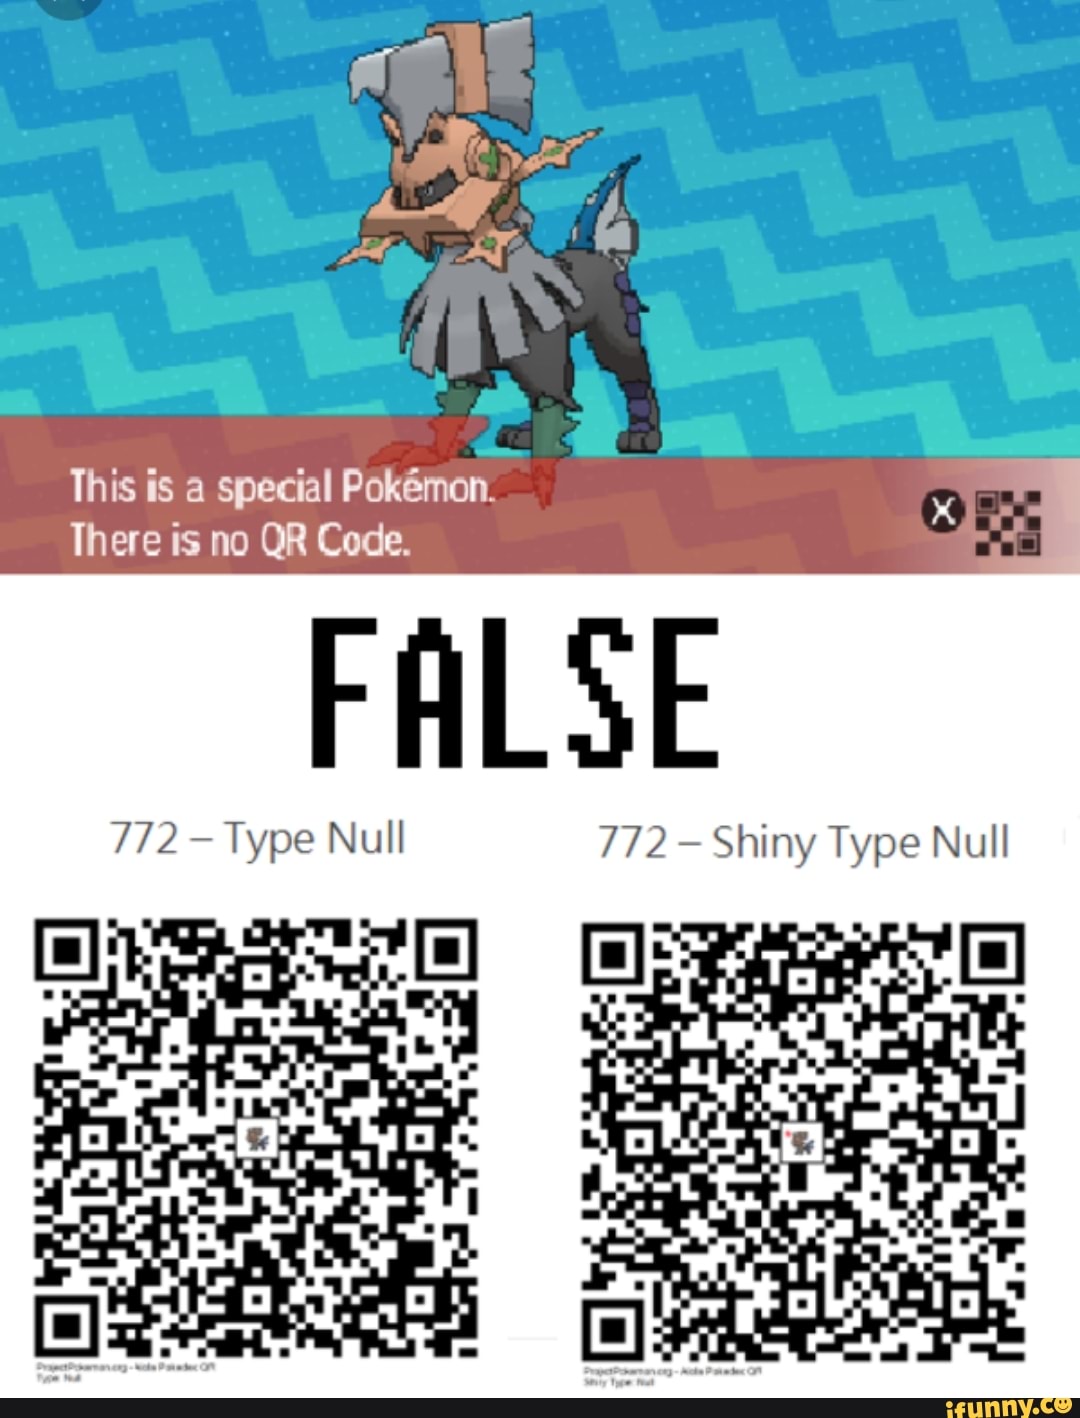 This Is A Special Pokemon Ih Ere Is No Qr Code Ffilse 772 Type Null 772 Shiny Type Null Ifunny